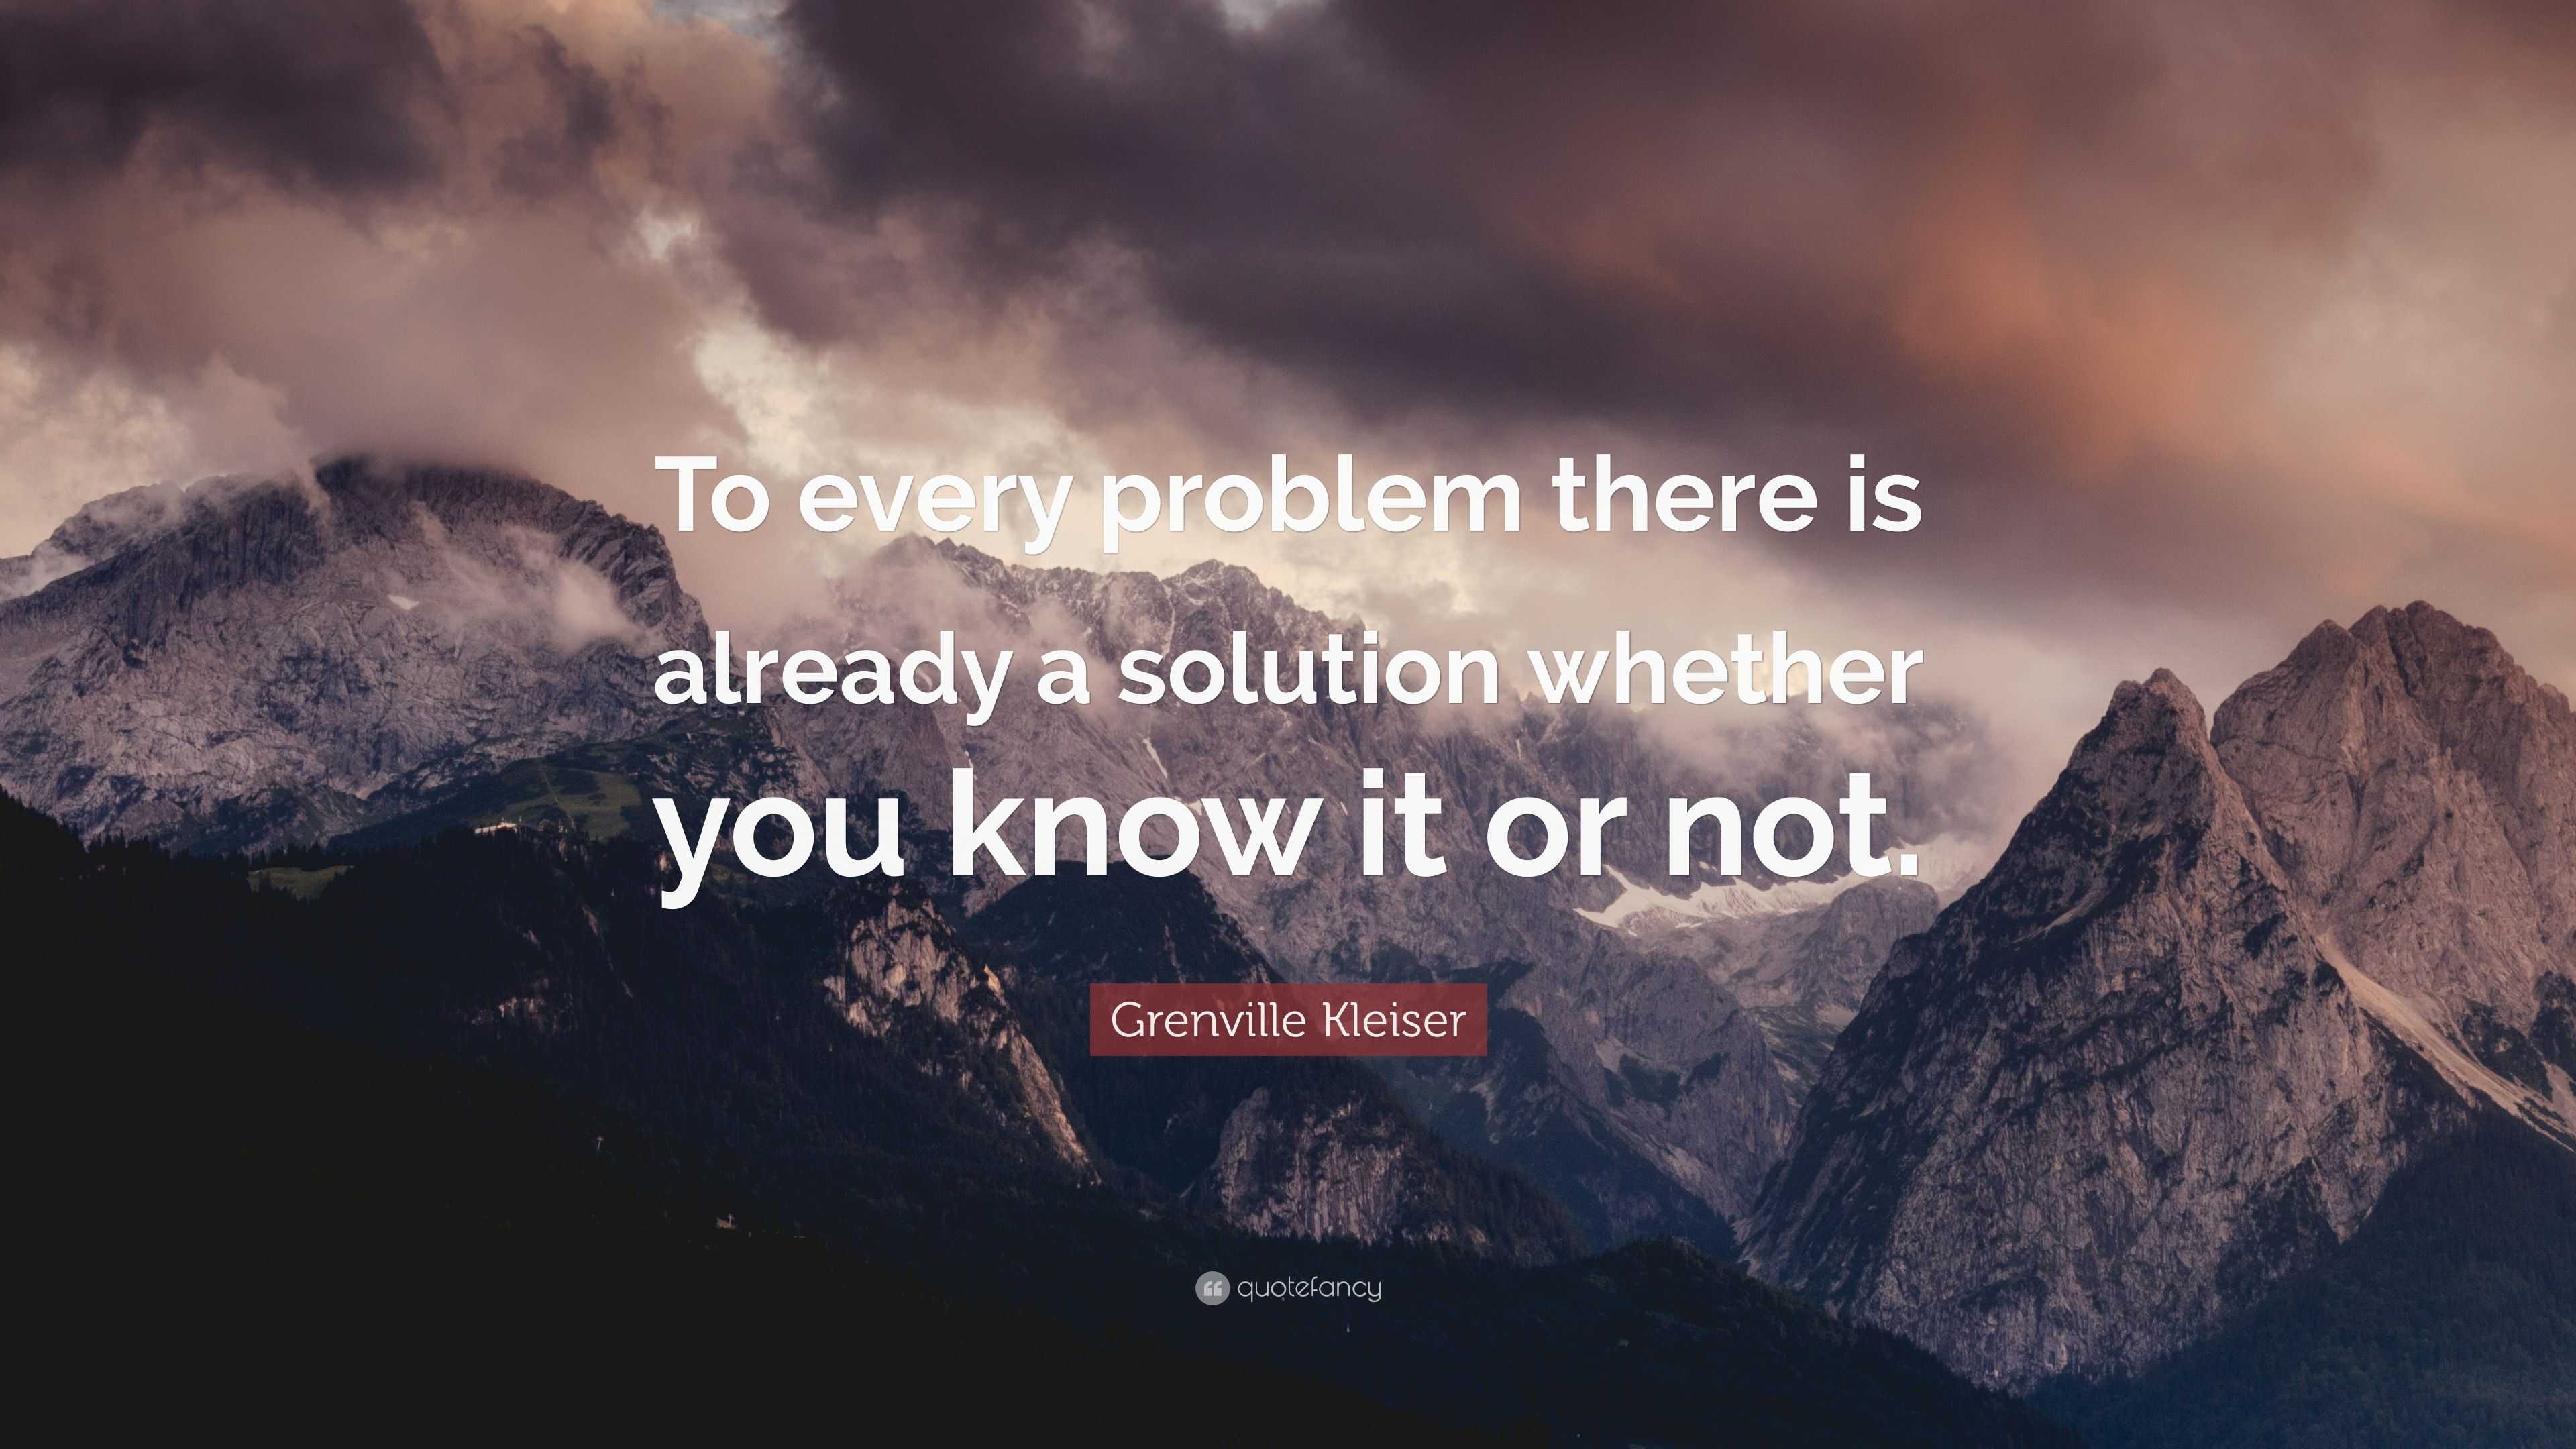 Grenville Kleiser Quote: “To every problem there is already a solution ...